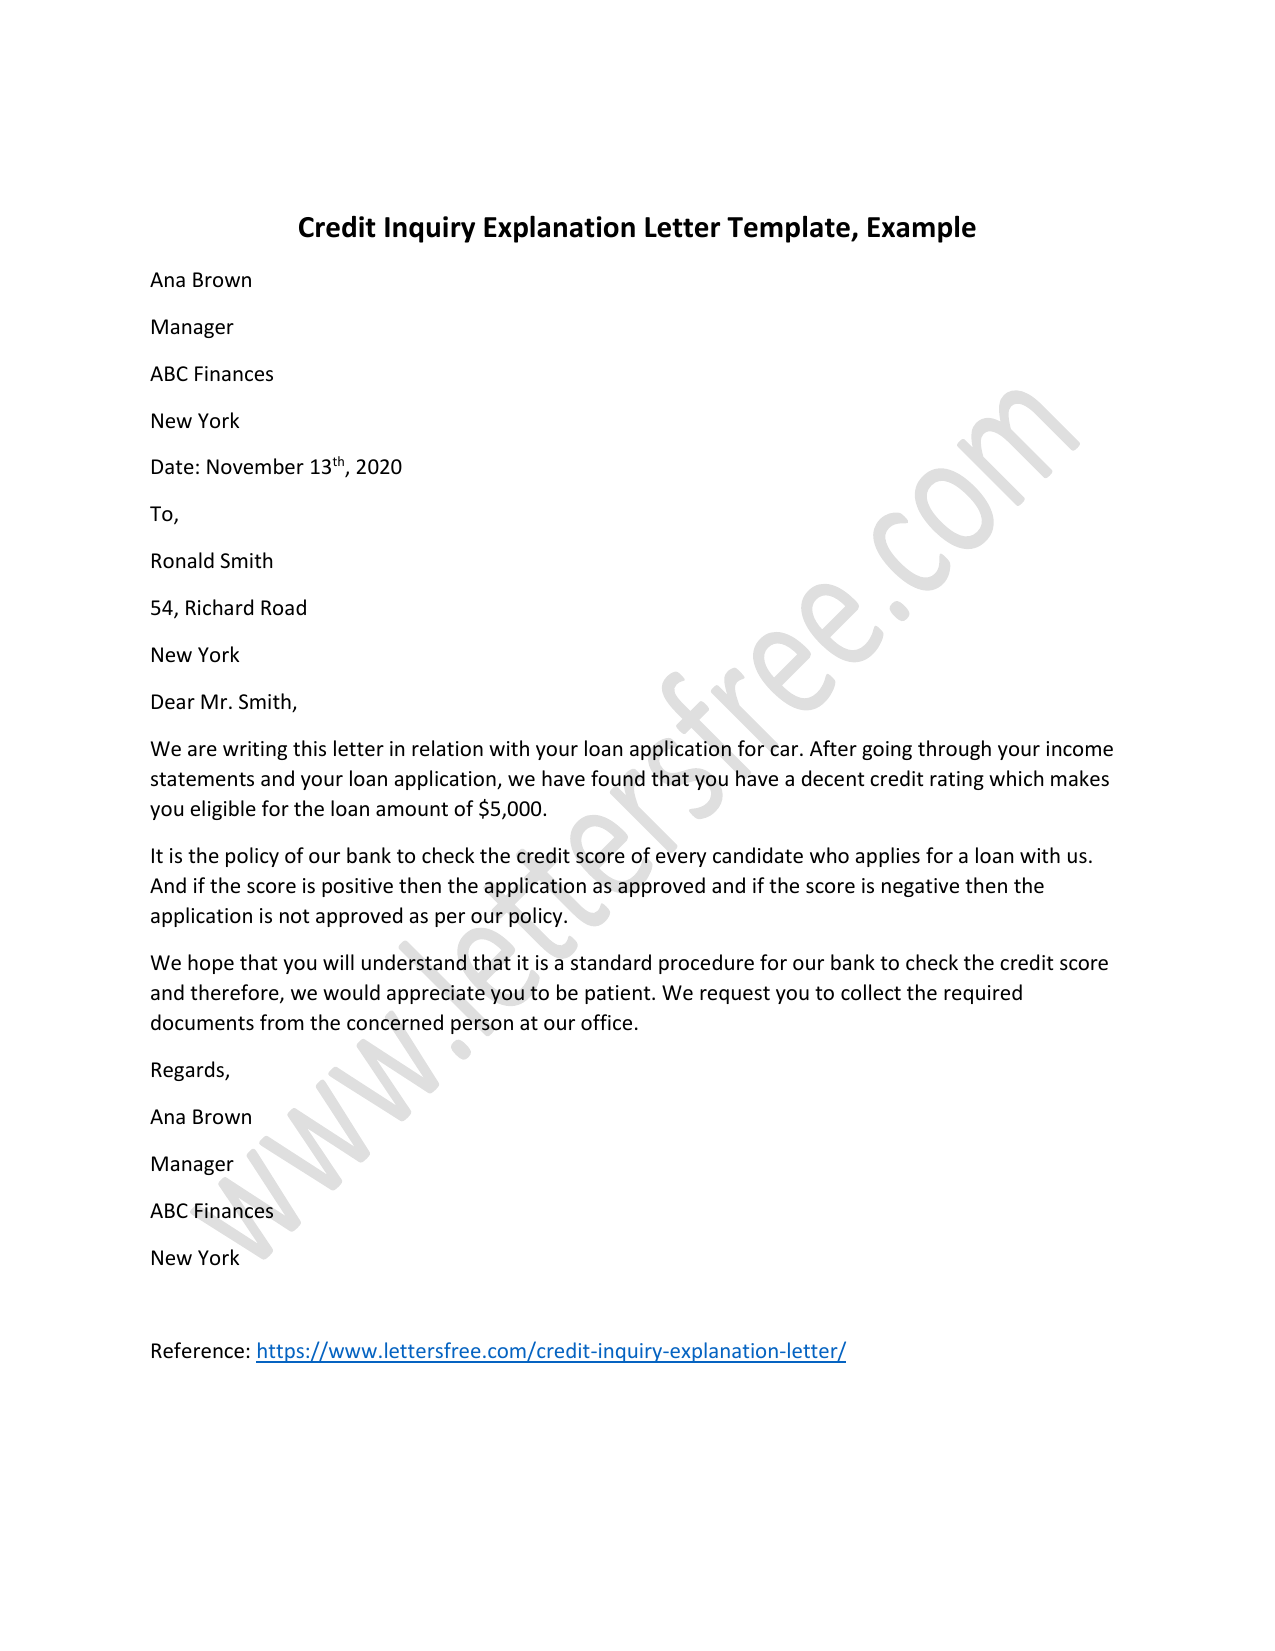 Credit Inquiry Explanation Letter Template